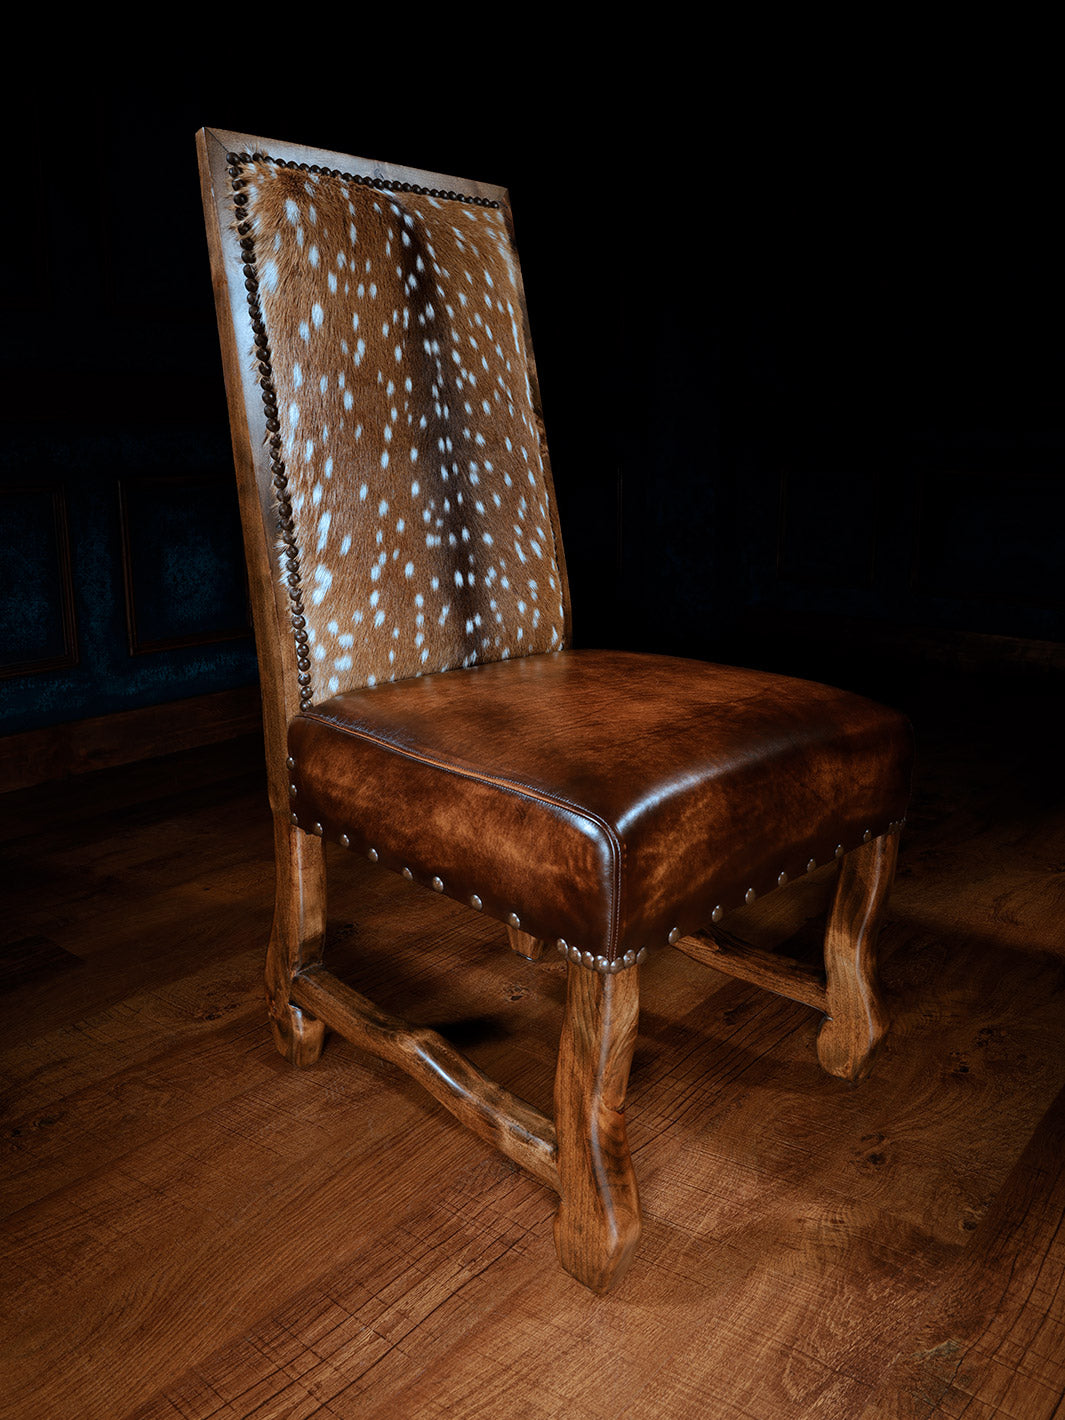 axis deer hide side chair with burnished leather seat